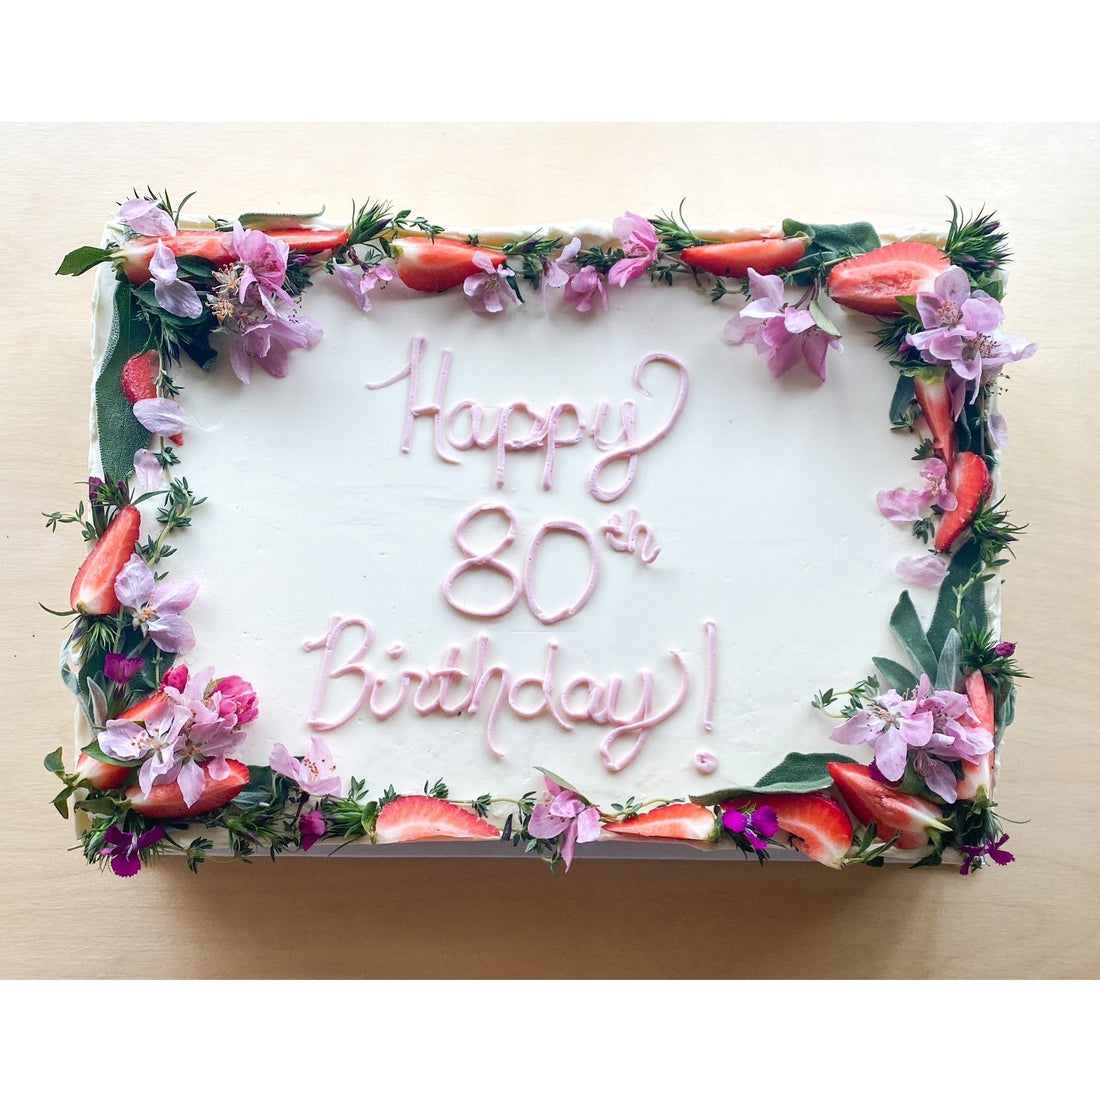 Old School Buttercream Birthday Cake | Melbourne Delivery & Pickup – Amour  Desserts